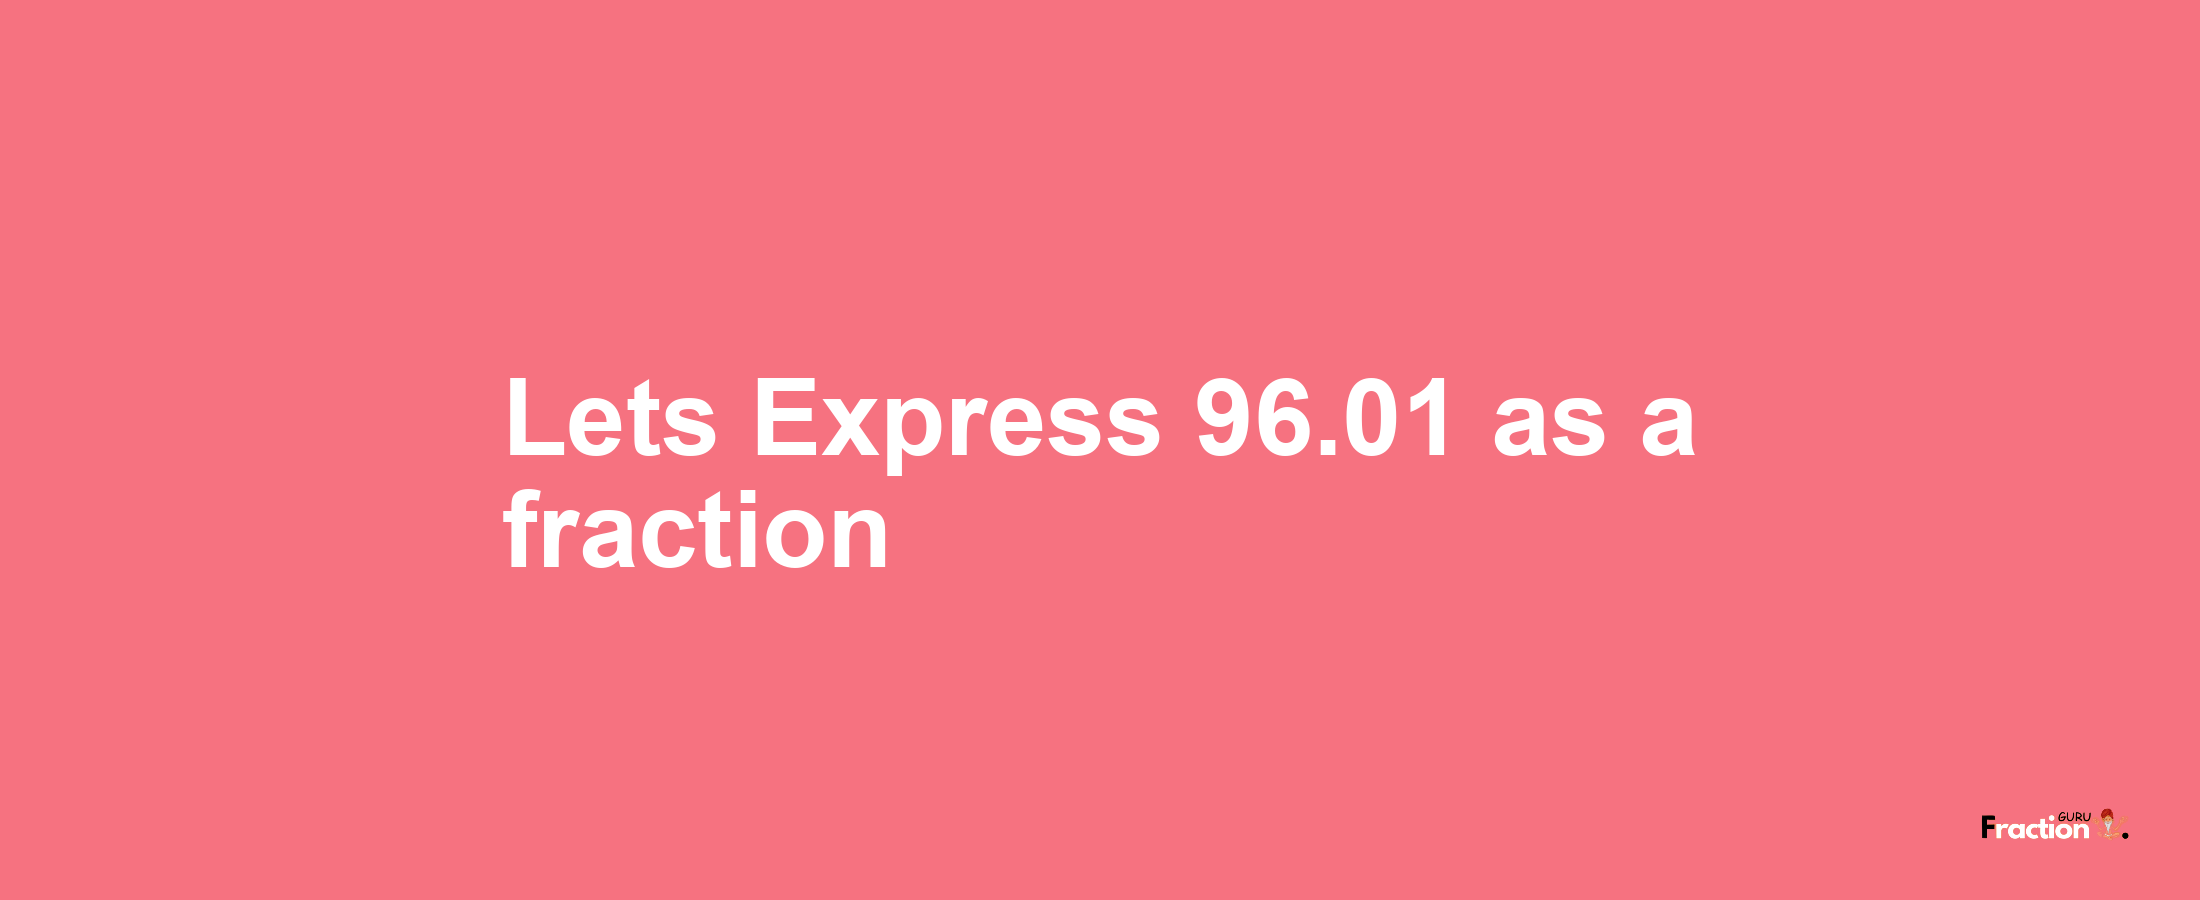 Lets Express 96.01 as afraction